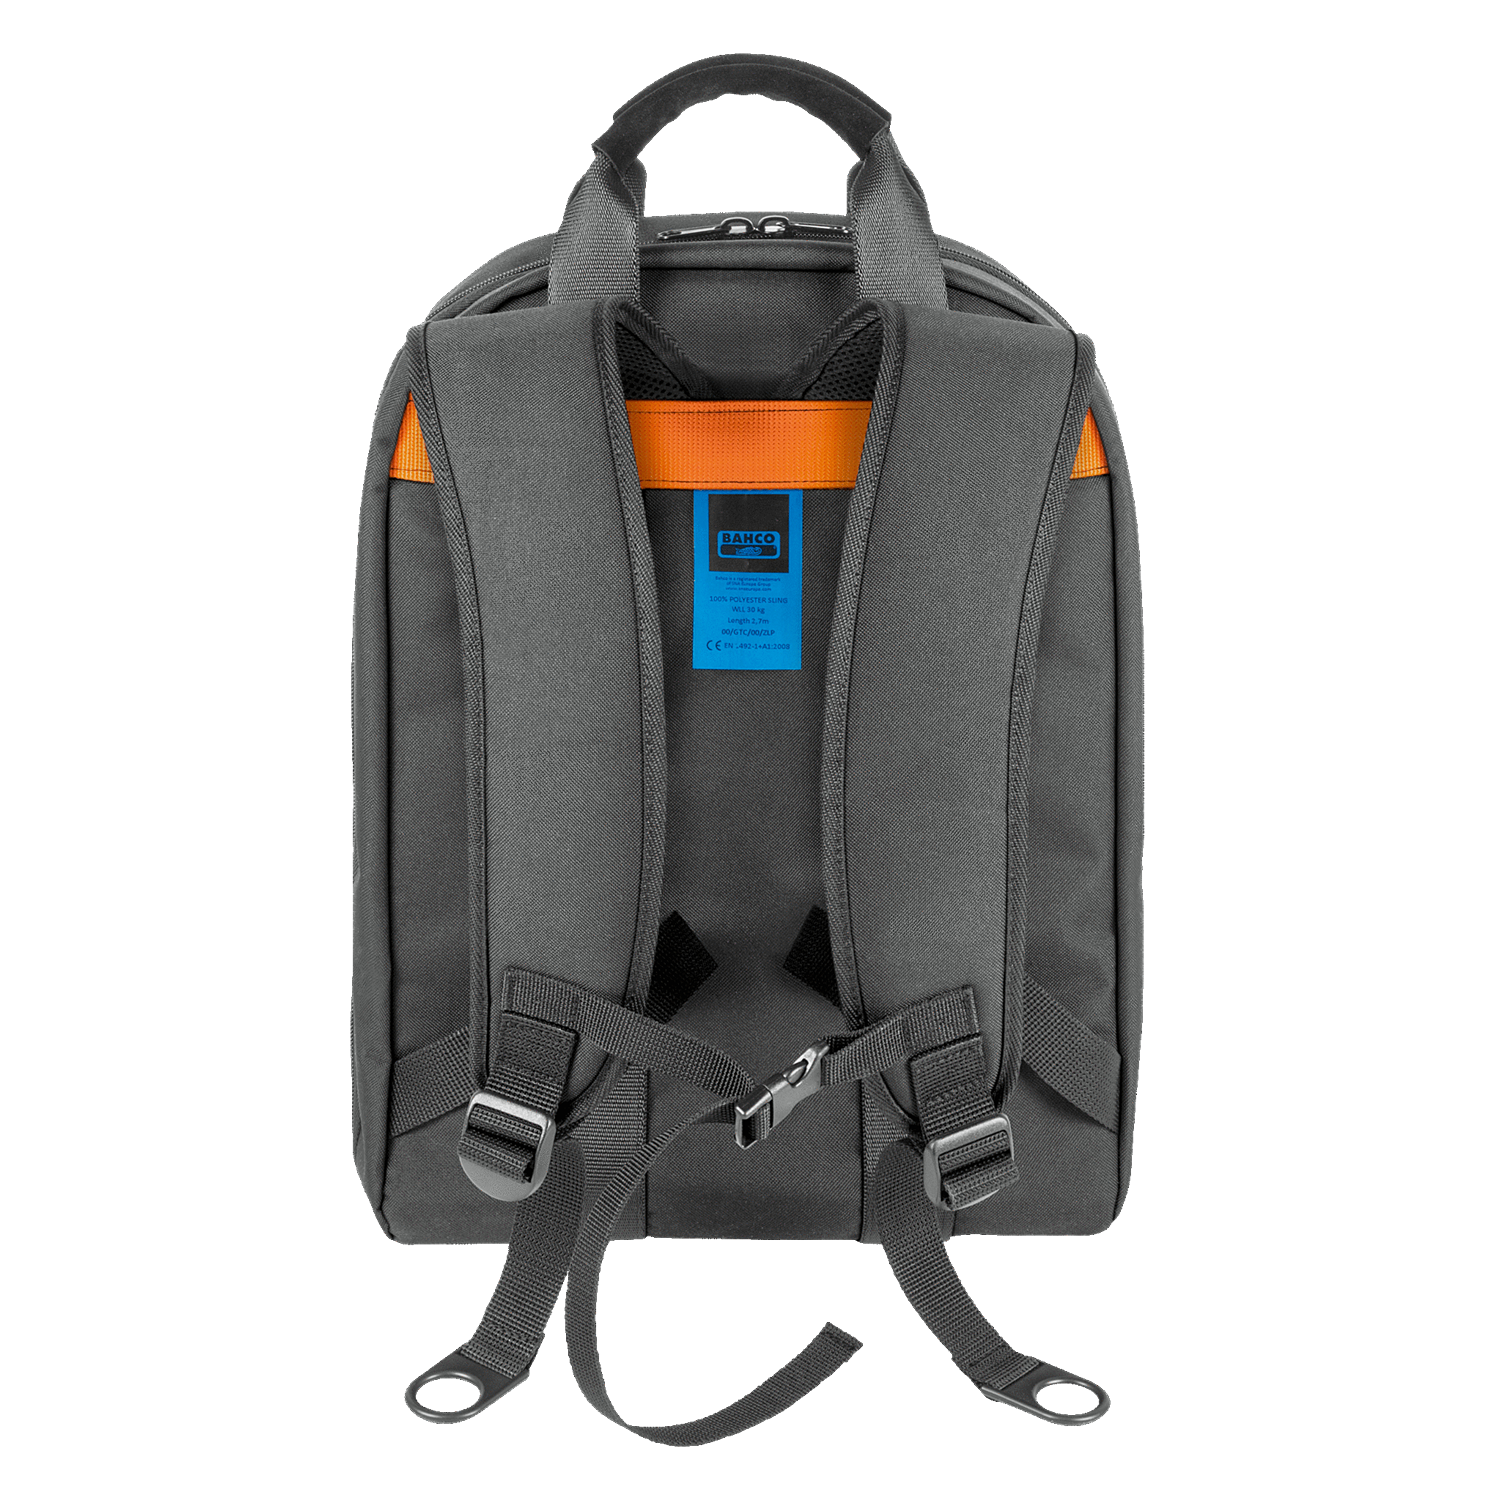 BAHCO 3875-BP2 Backpacks Large Size Tool Storage - Premium Tool Storage from BAHCO - Shop now at Yew Aik.